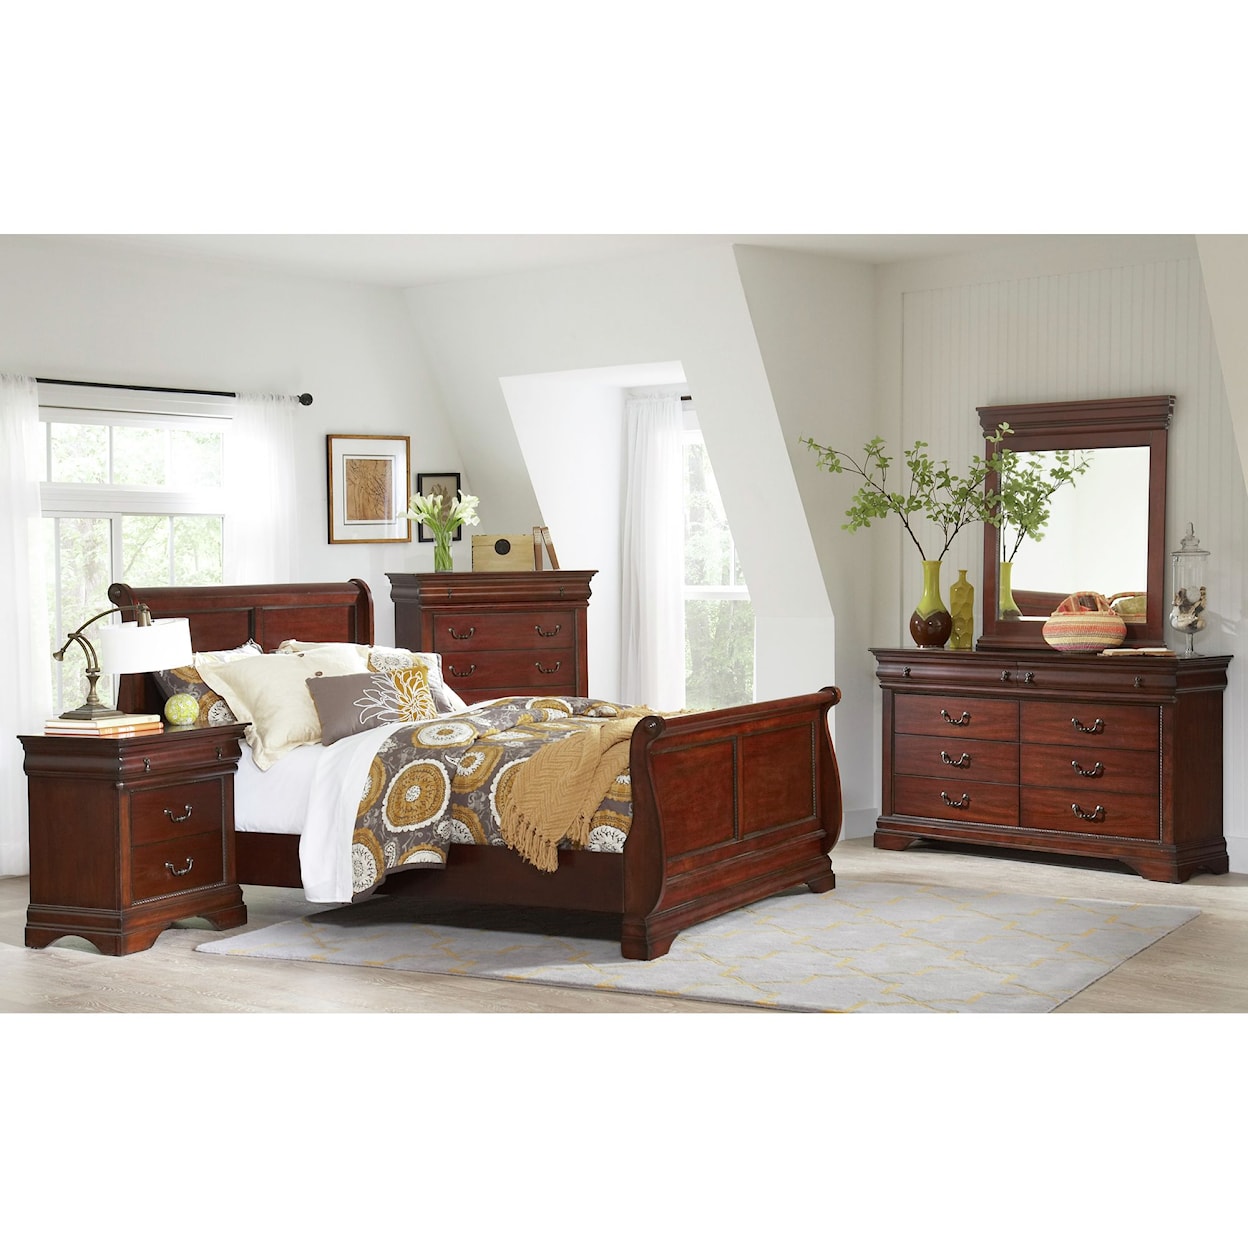 Elements International Chateau Queen Bedroom Group